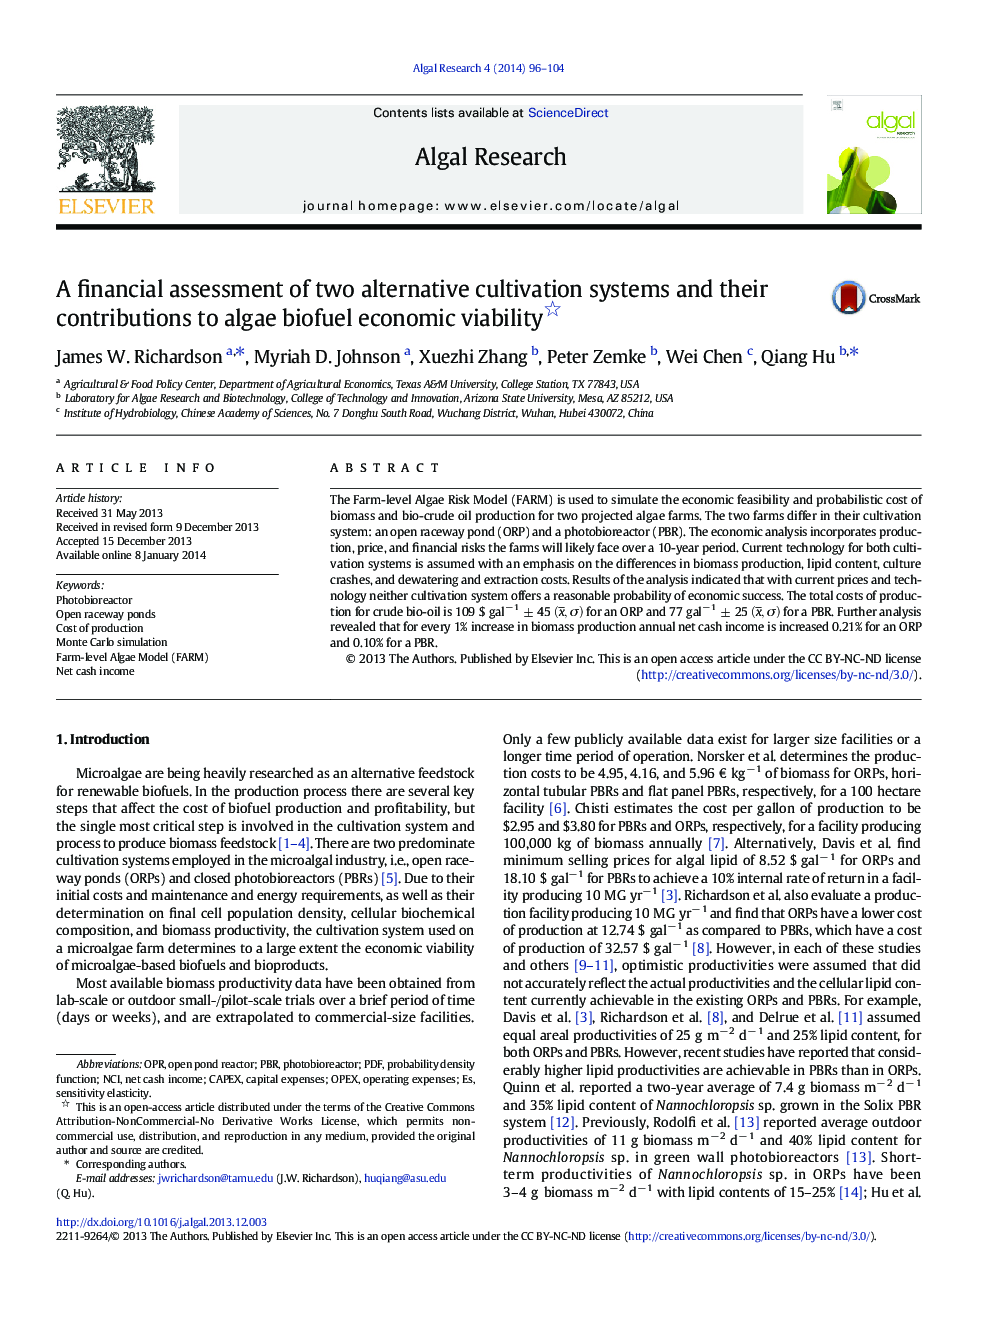 A financial assessment of two alternative cultivation systems and their contributions to algae biofuel economic viability